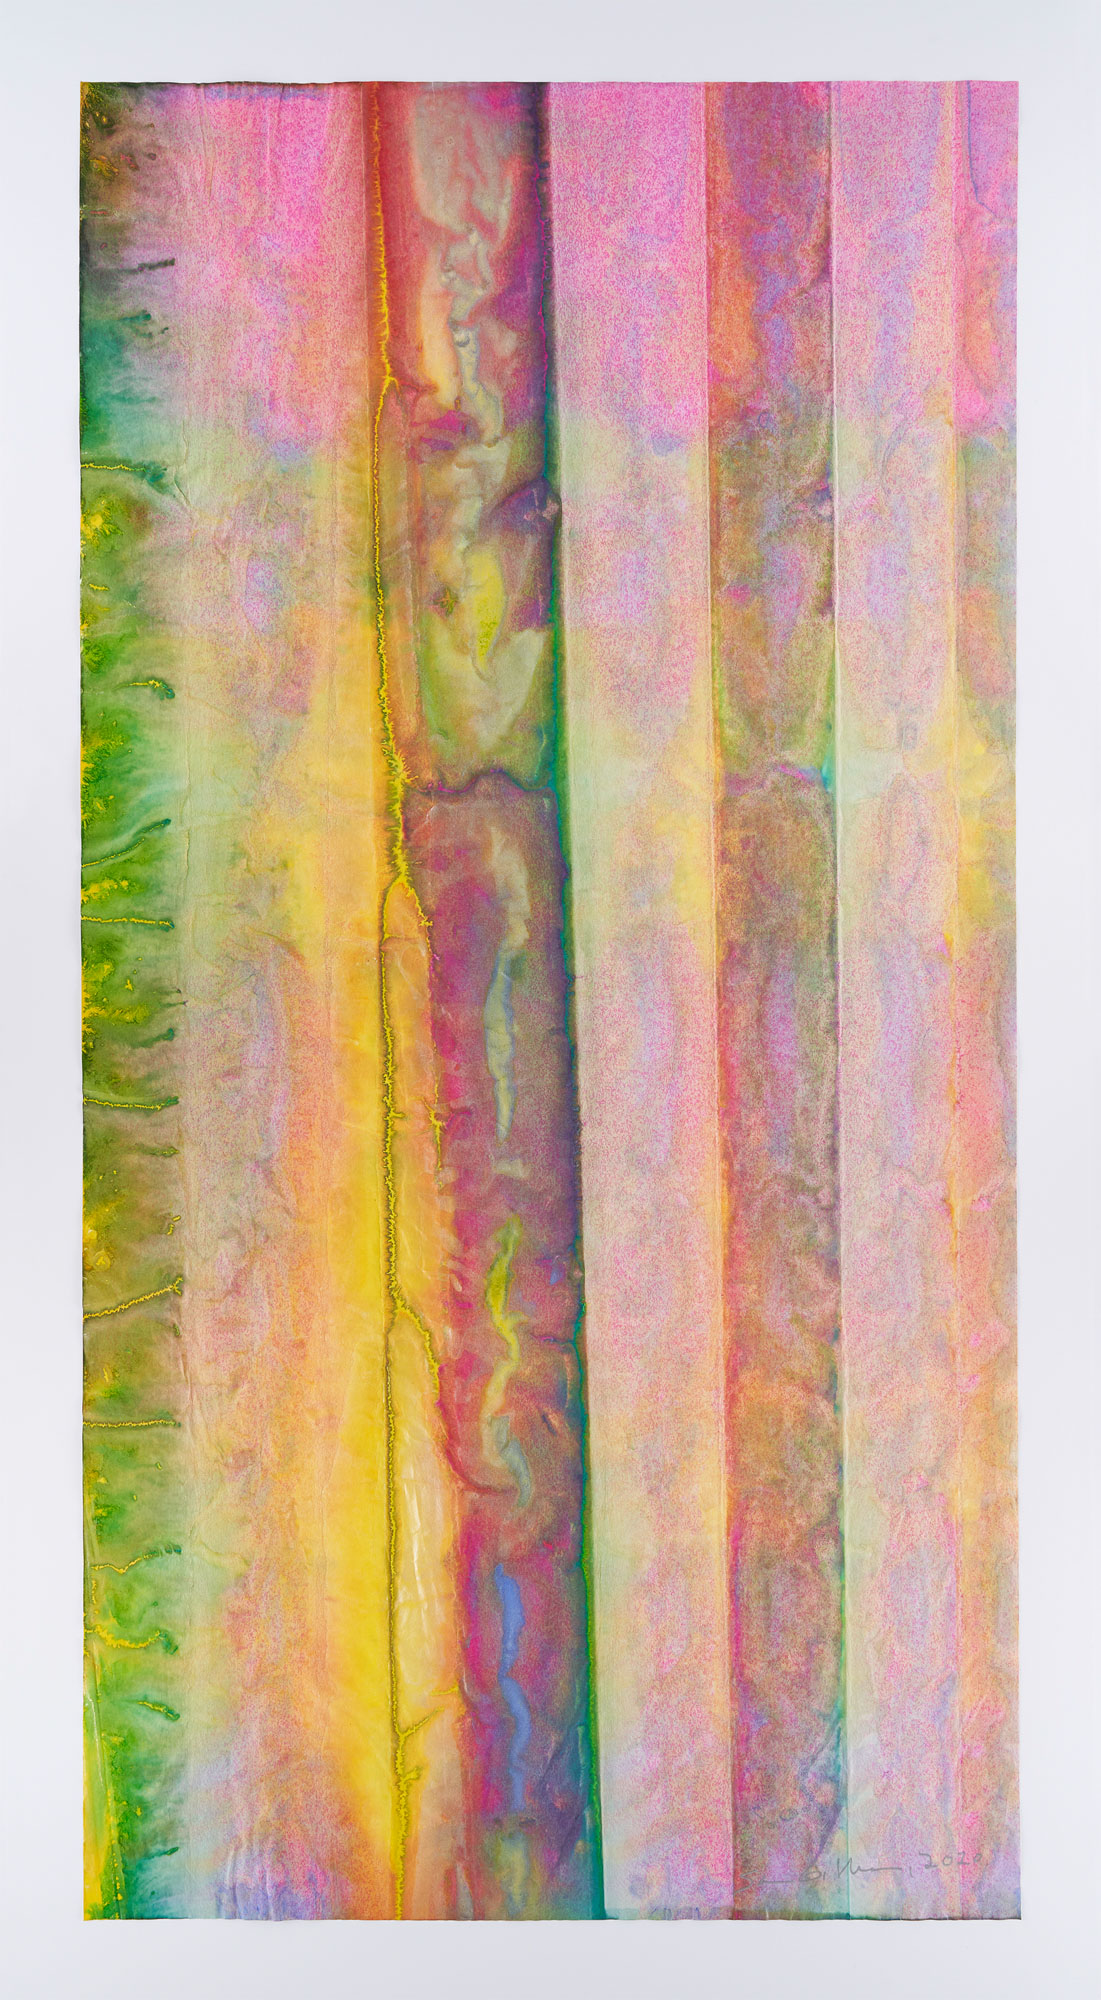 Untitled, 2020. Photo courtesy Pace Gallery and David Kordansky Gallery © Sam Gilliam/ 2022 Artists Rights Society (ARS), New York